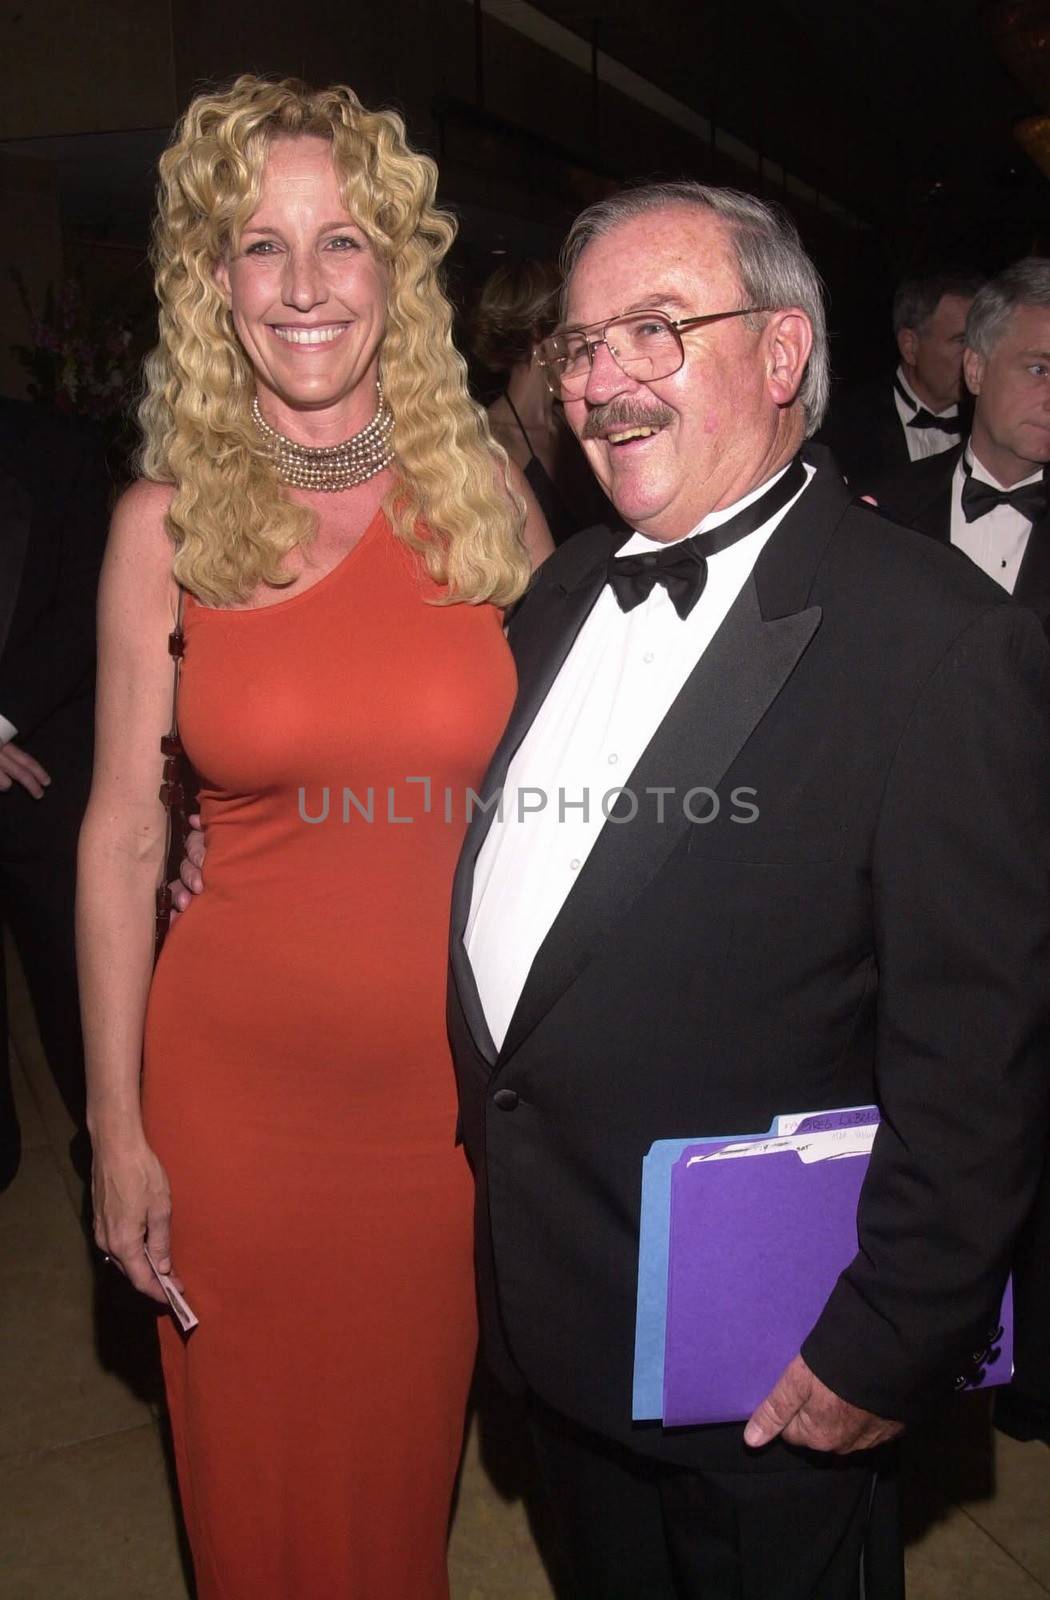 Erin Brockovich-Ellis and Gregory Labrache at the Night Under The Stars Dinner-Dance to raise money for MS. Beverly Hills, 04-29-00